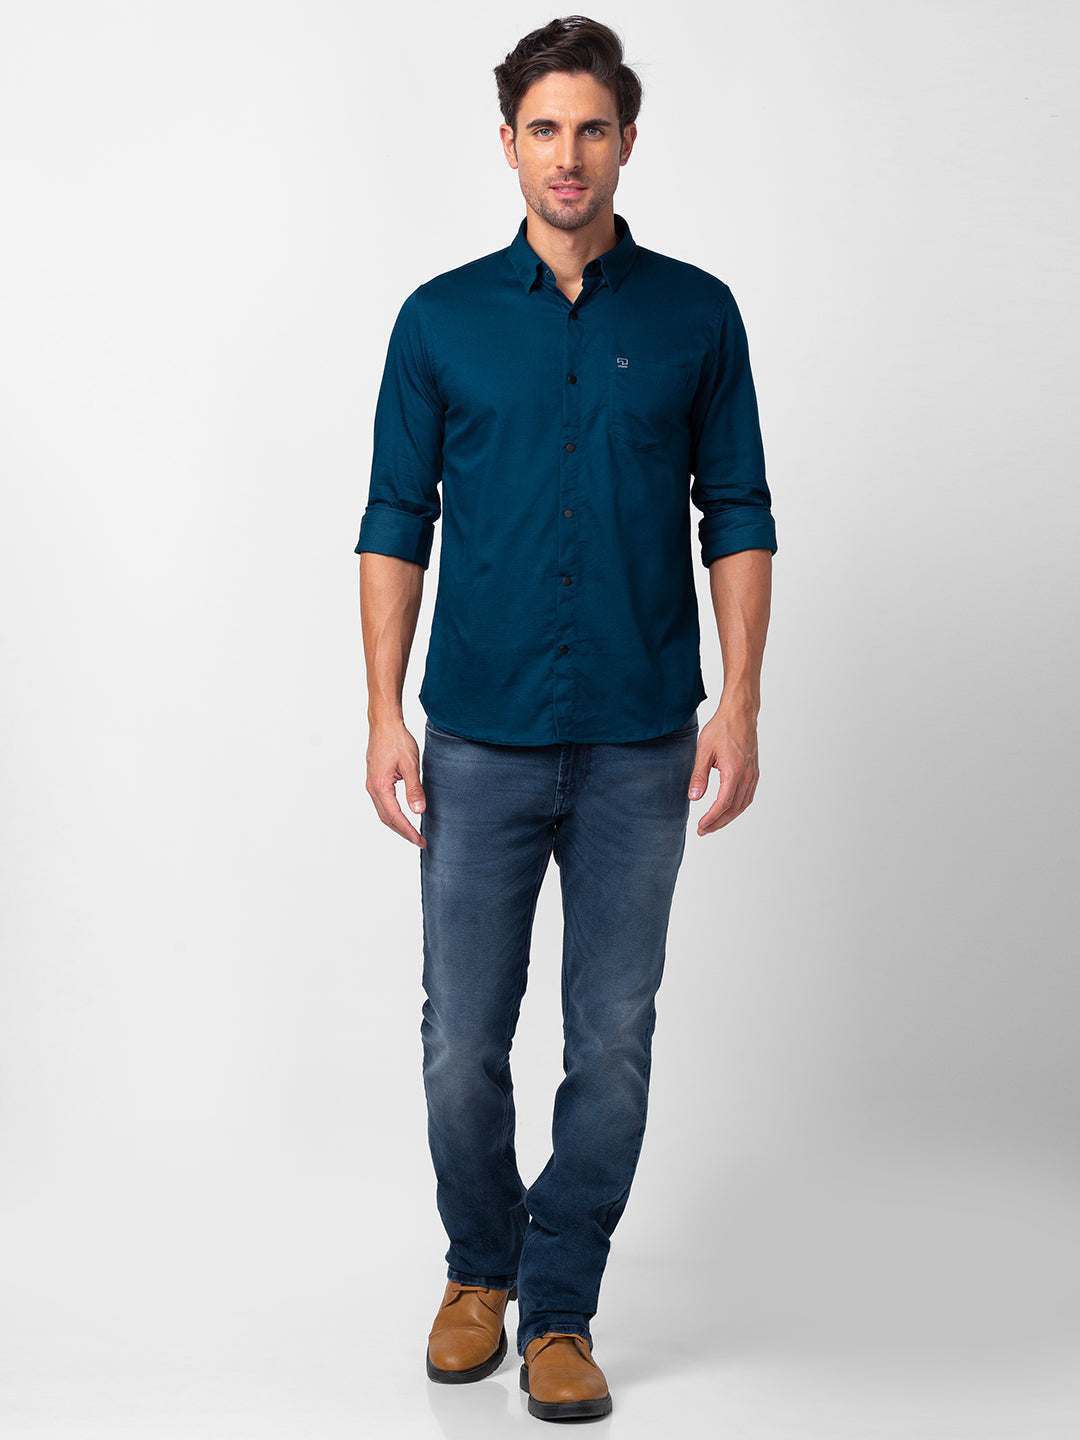 What color pants would go well with a teal color shirt  Quora